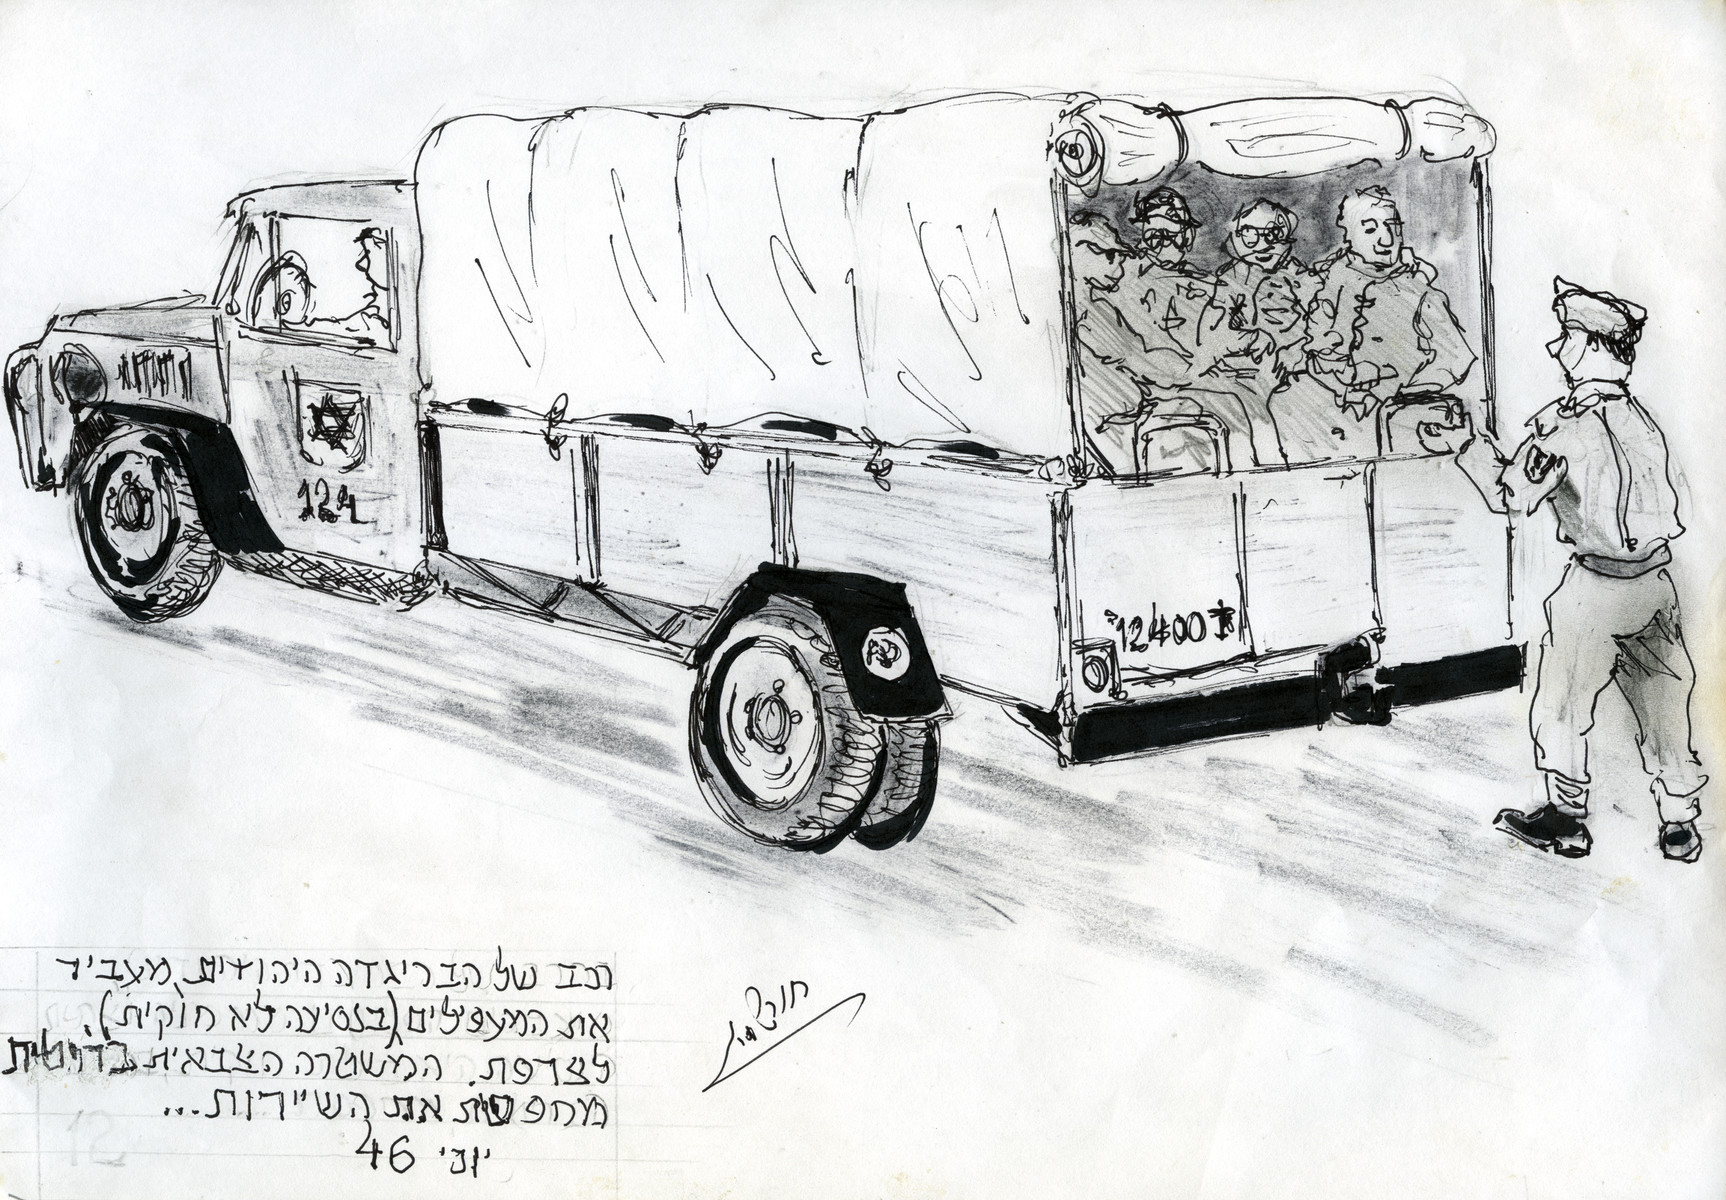 Page of a pictoral memoir drawn by the donor documenting his experiences after the Holocaust.

The drawing shows Jewish refugees in a Jewish Brigade truck en route to France.